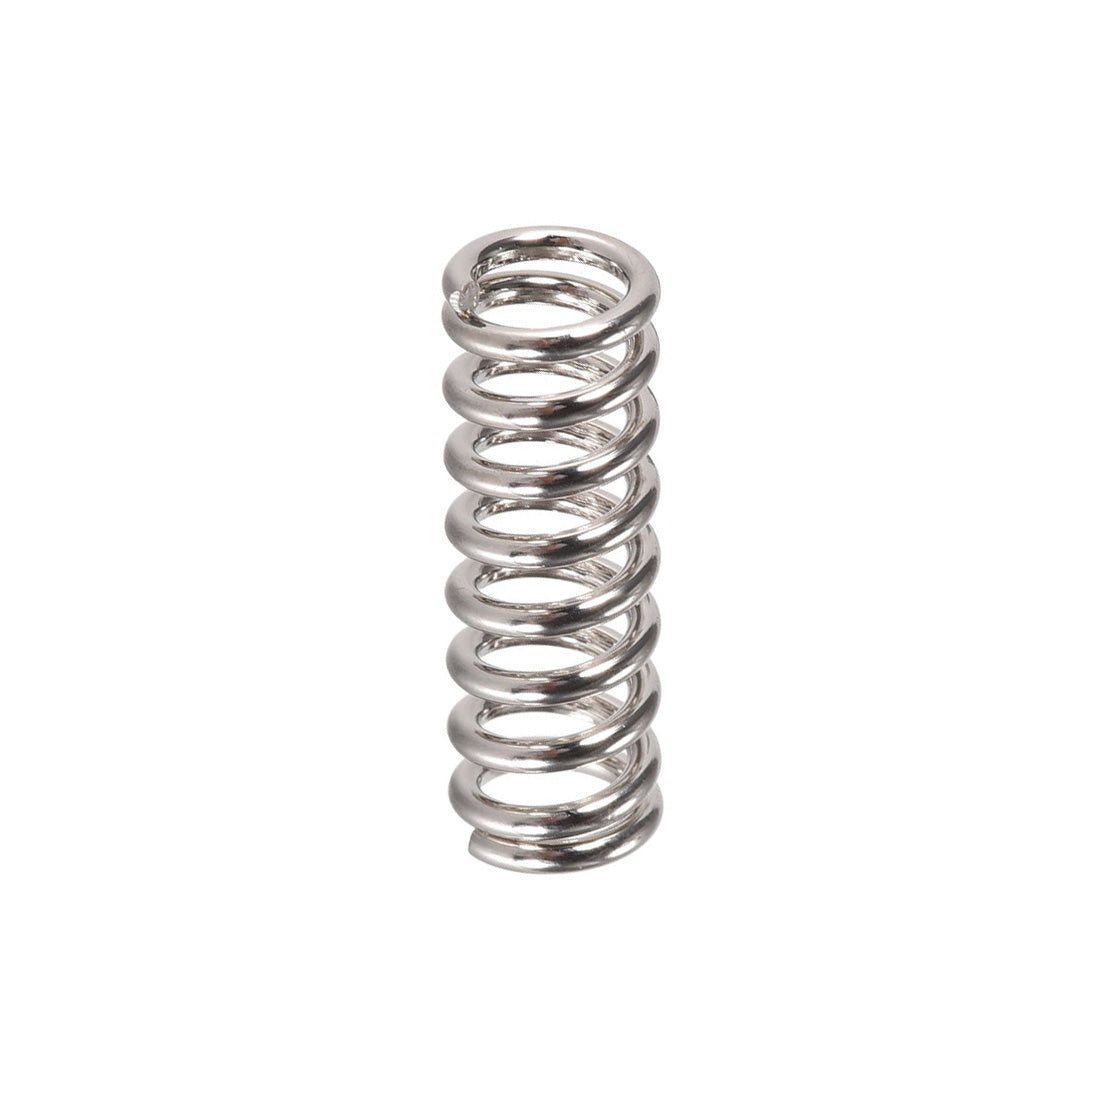 uxcell Uxcell Heated Bed Springs for 3D Printer Extruder Compression Spring, 7.5 x 20 mm 30pcs